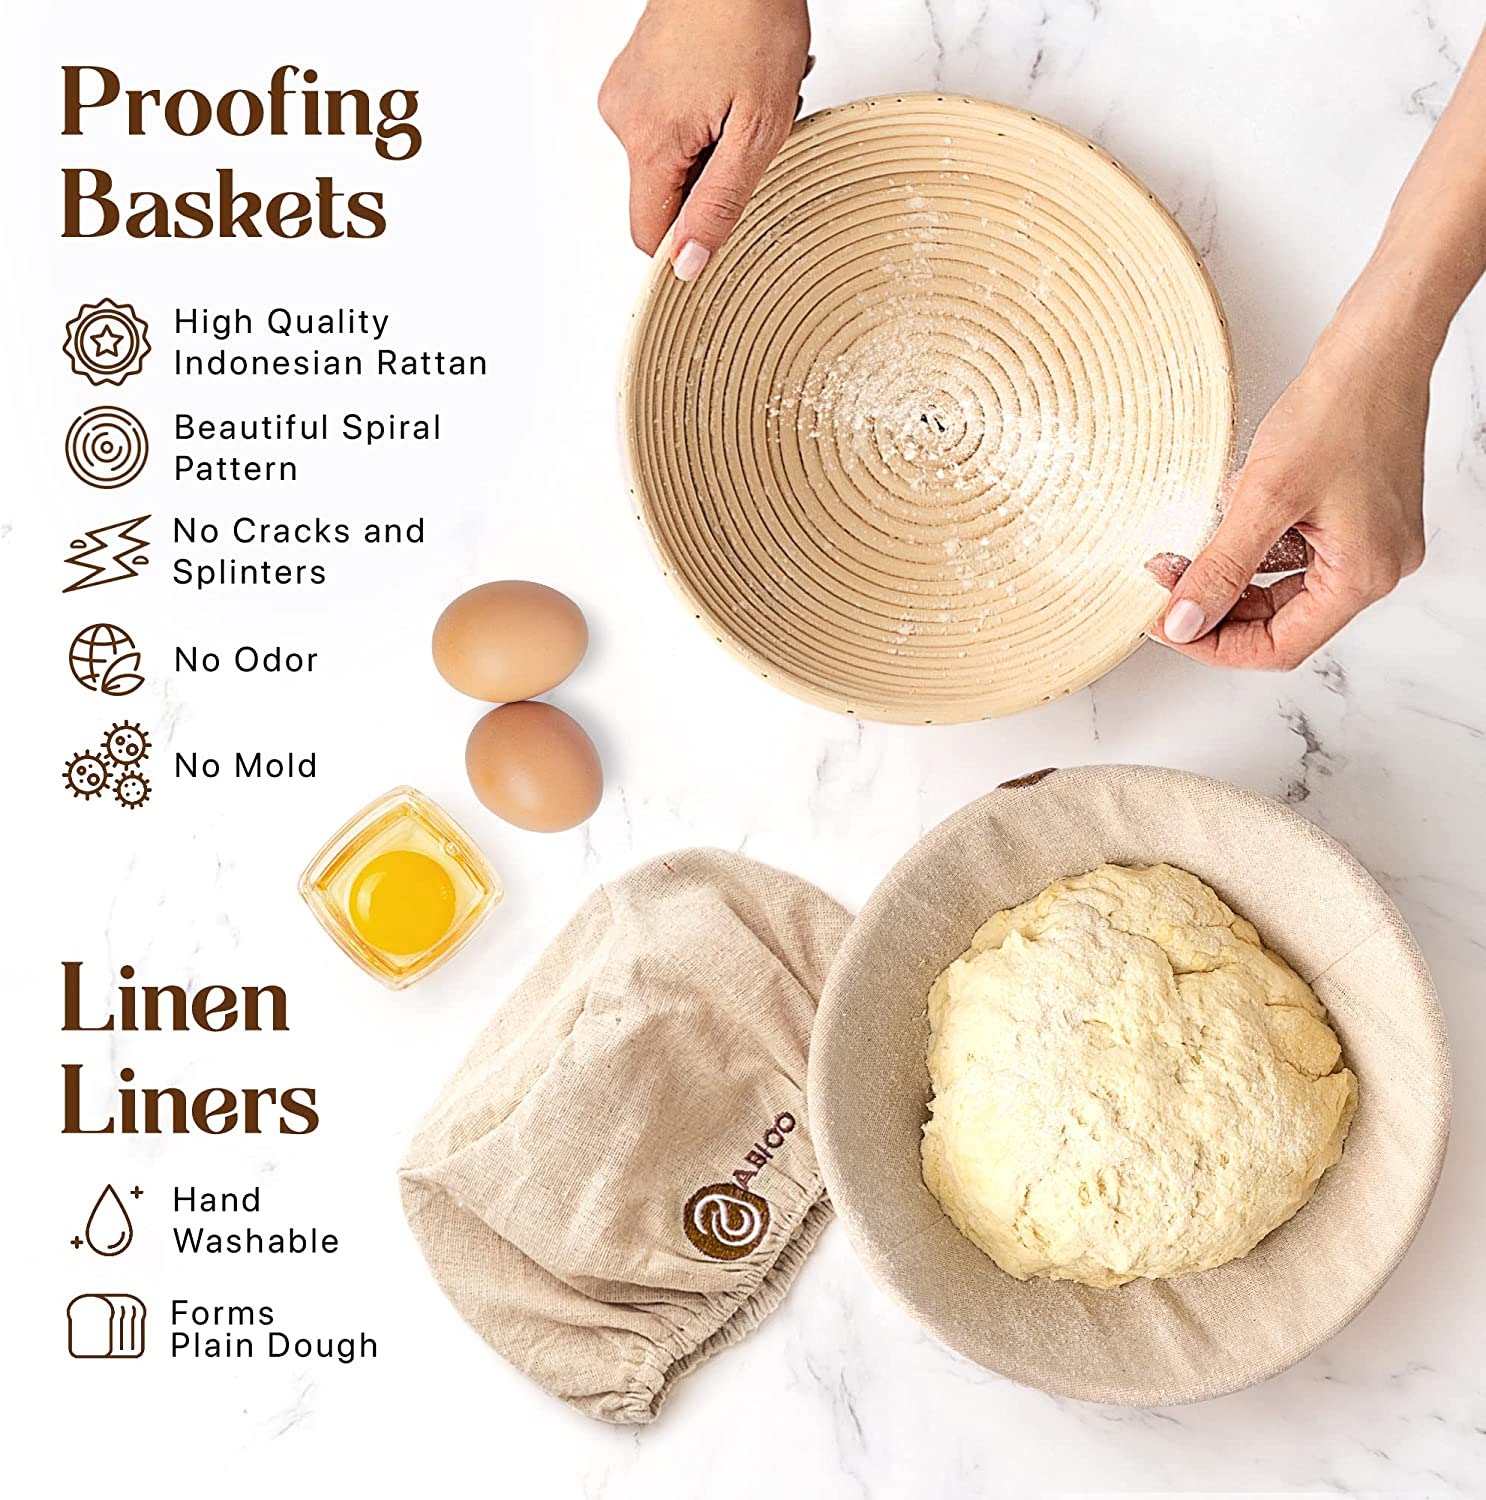 2x Oval Bread Banneton Proofing Basket Baking Bowl Set With Dough